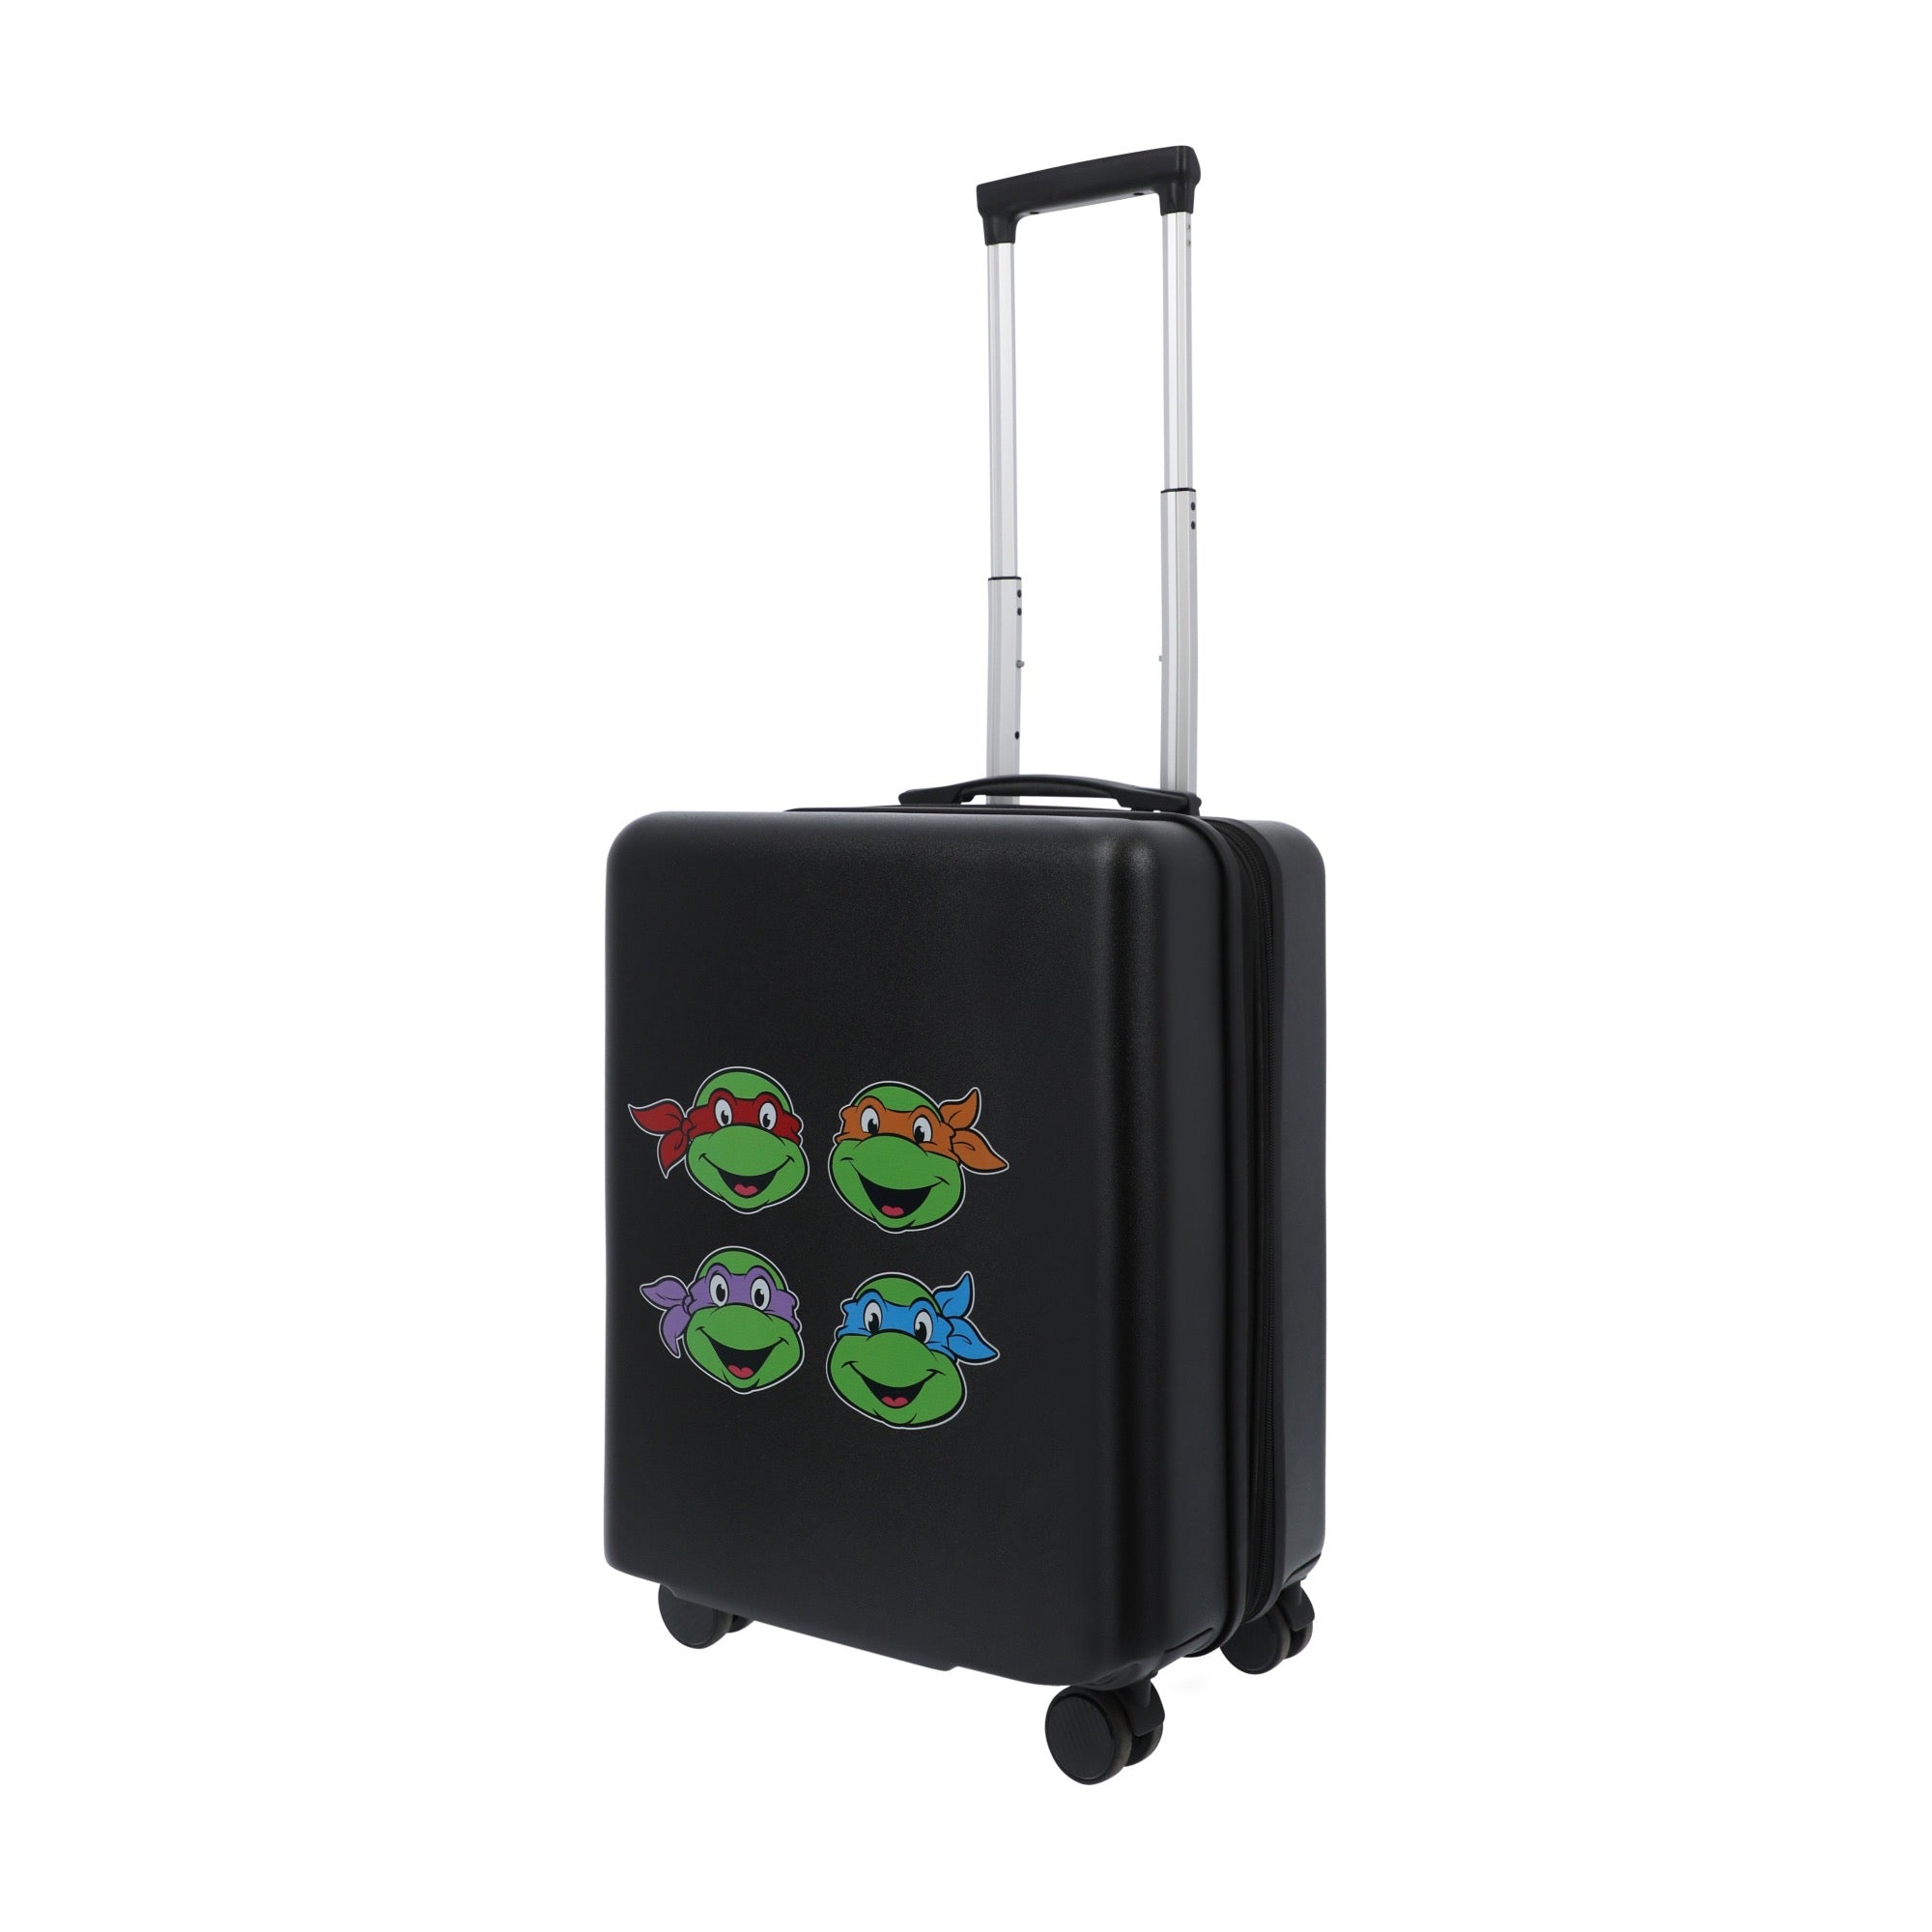 Black paramount TMNT 22.5" carry-on spinner suitcase luggage by Ful